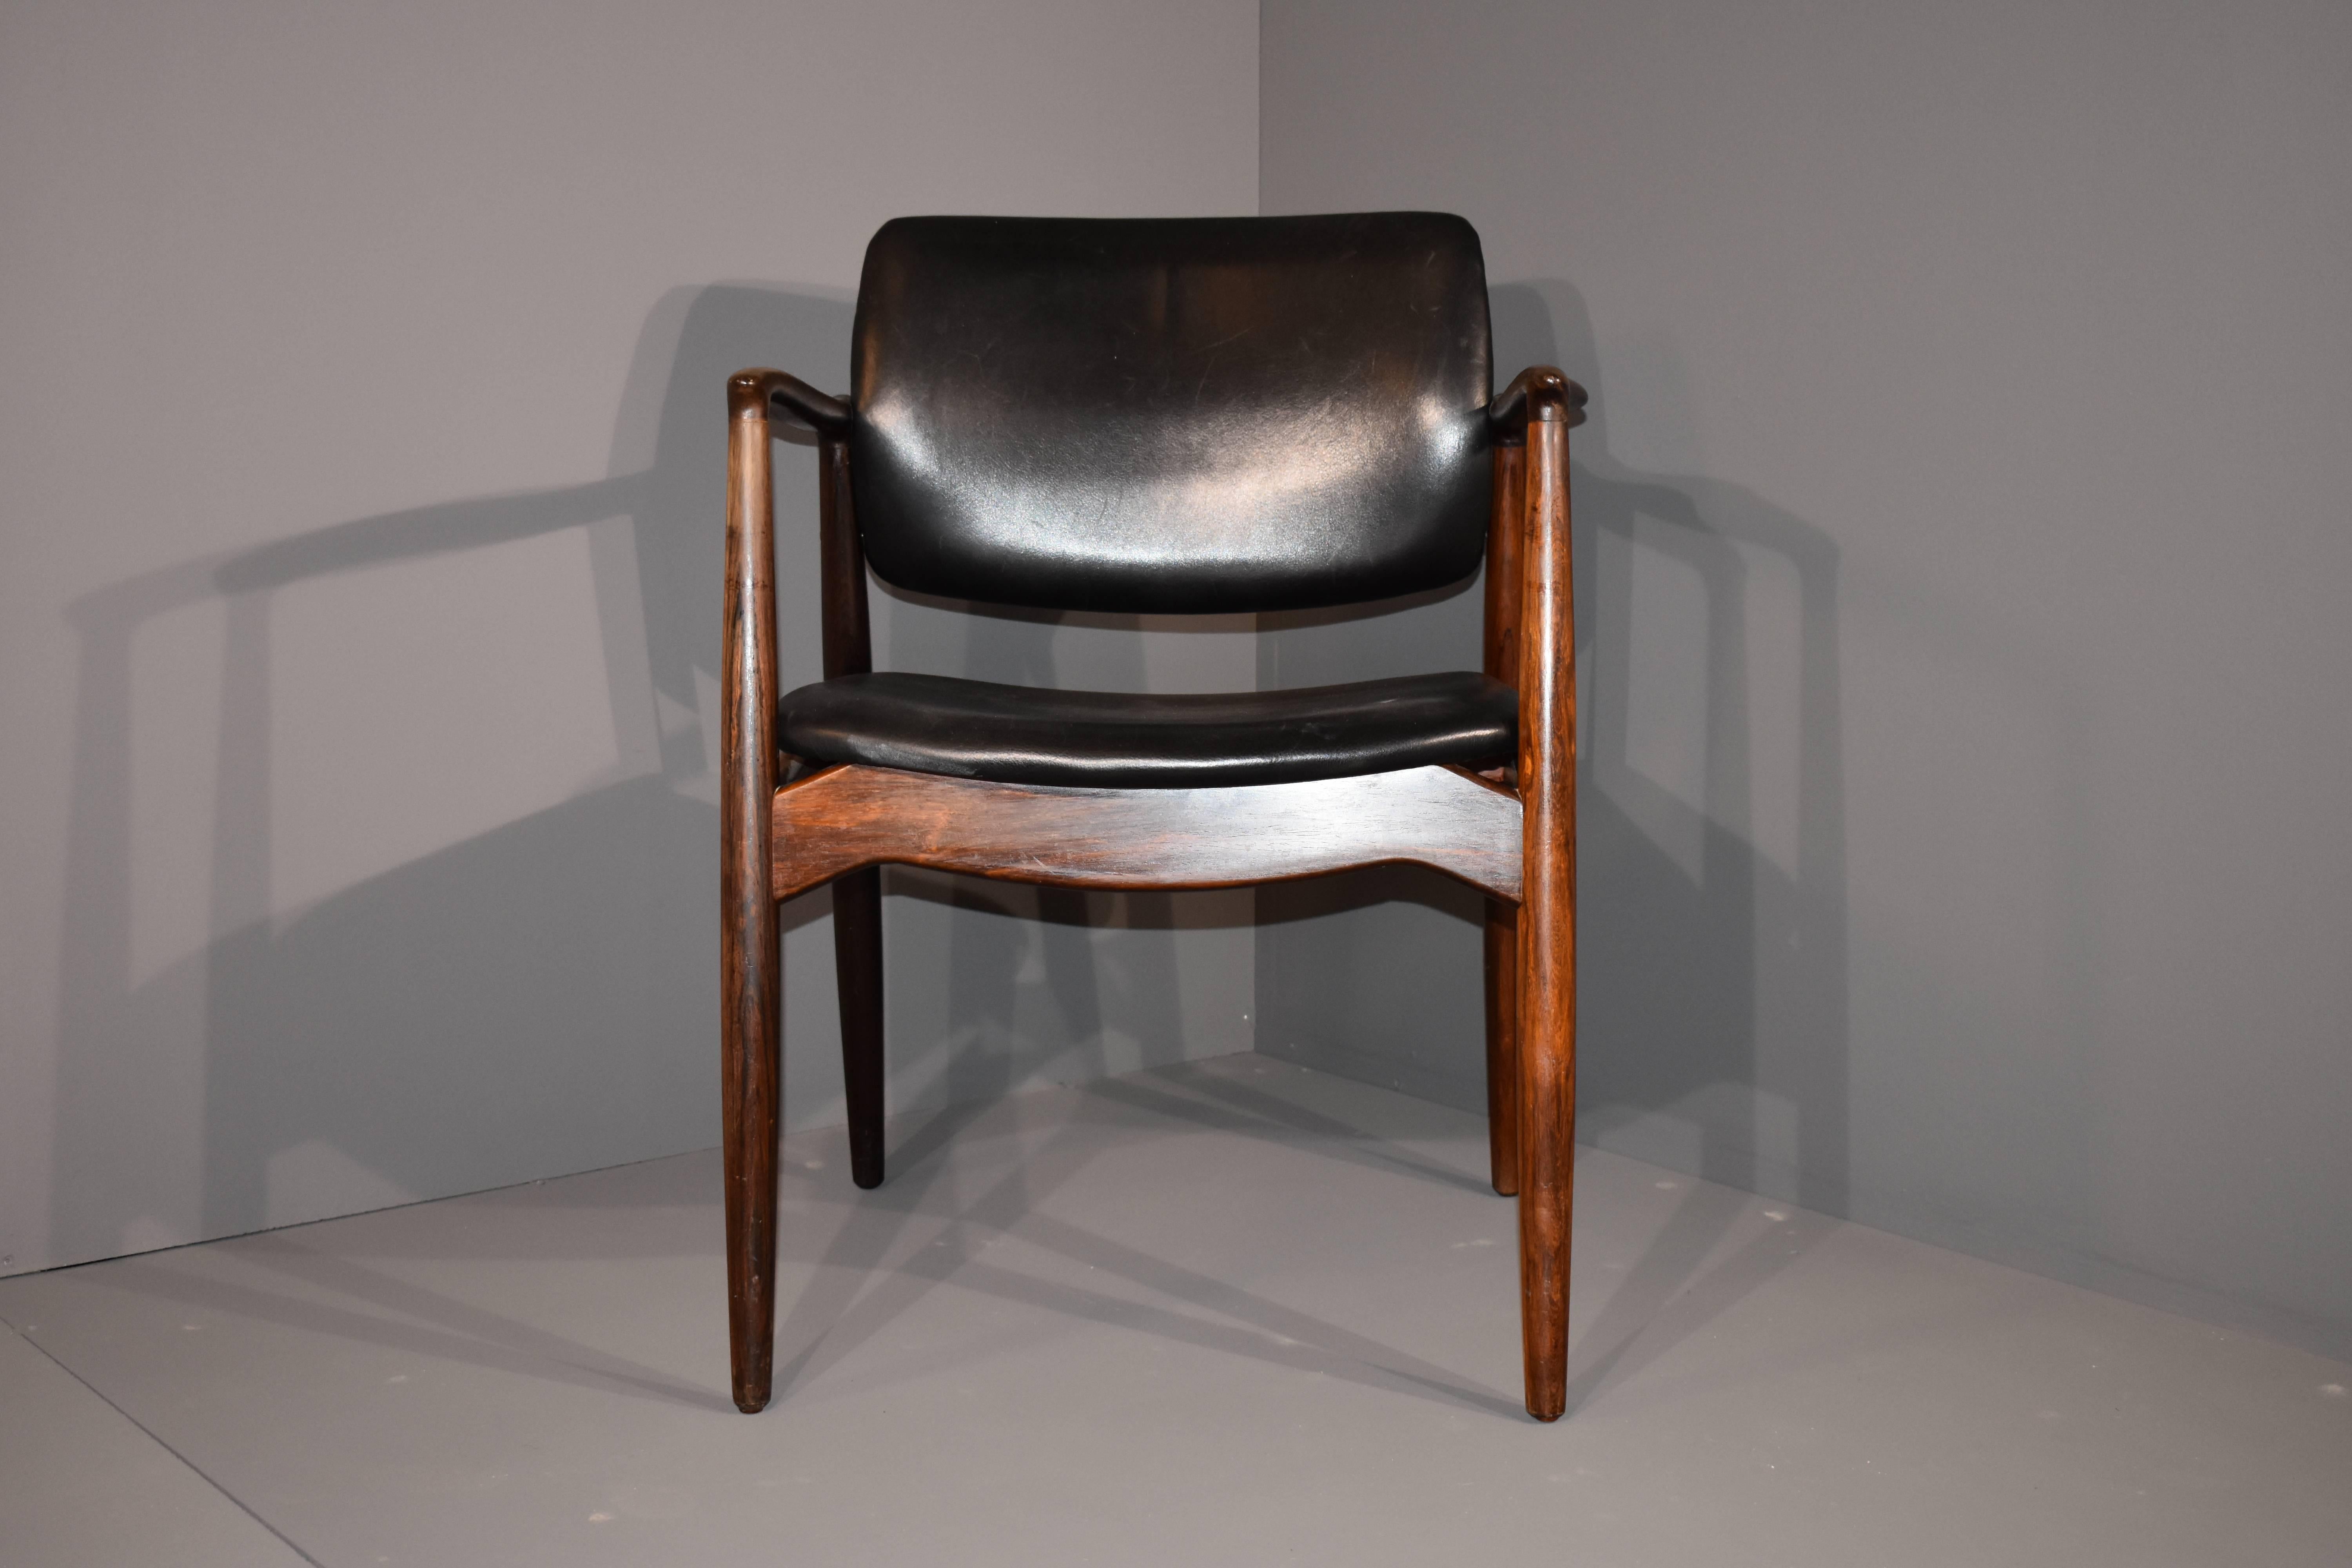 A rosewood armchair designed by Erik Buch.
Black leather upholstery.